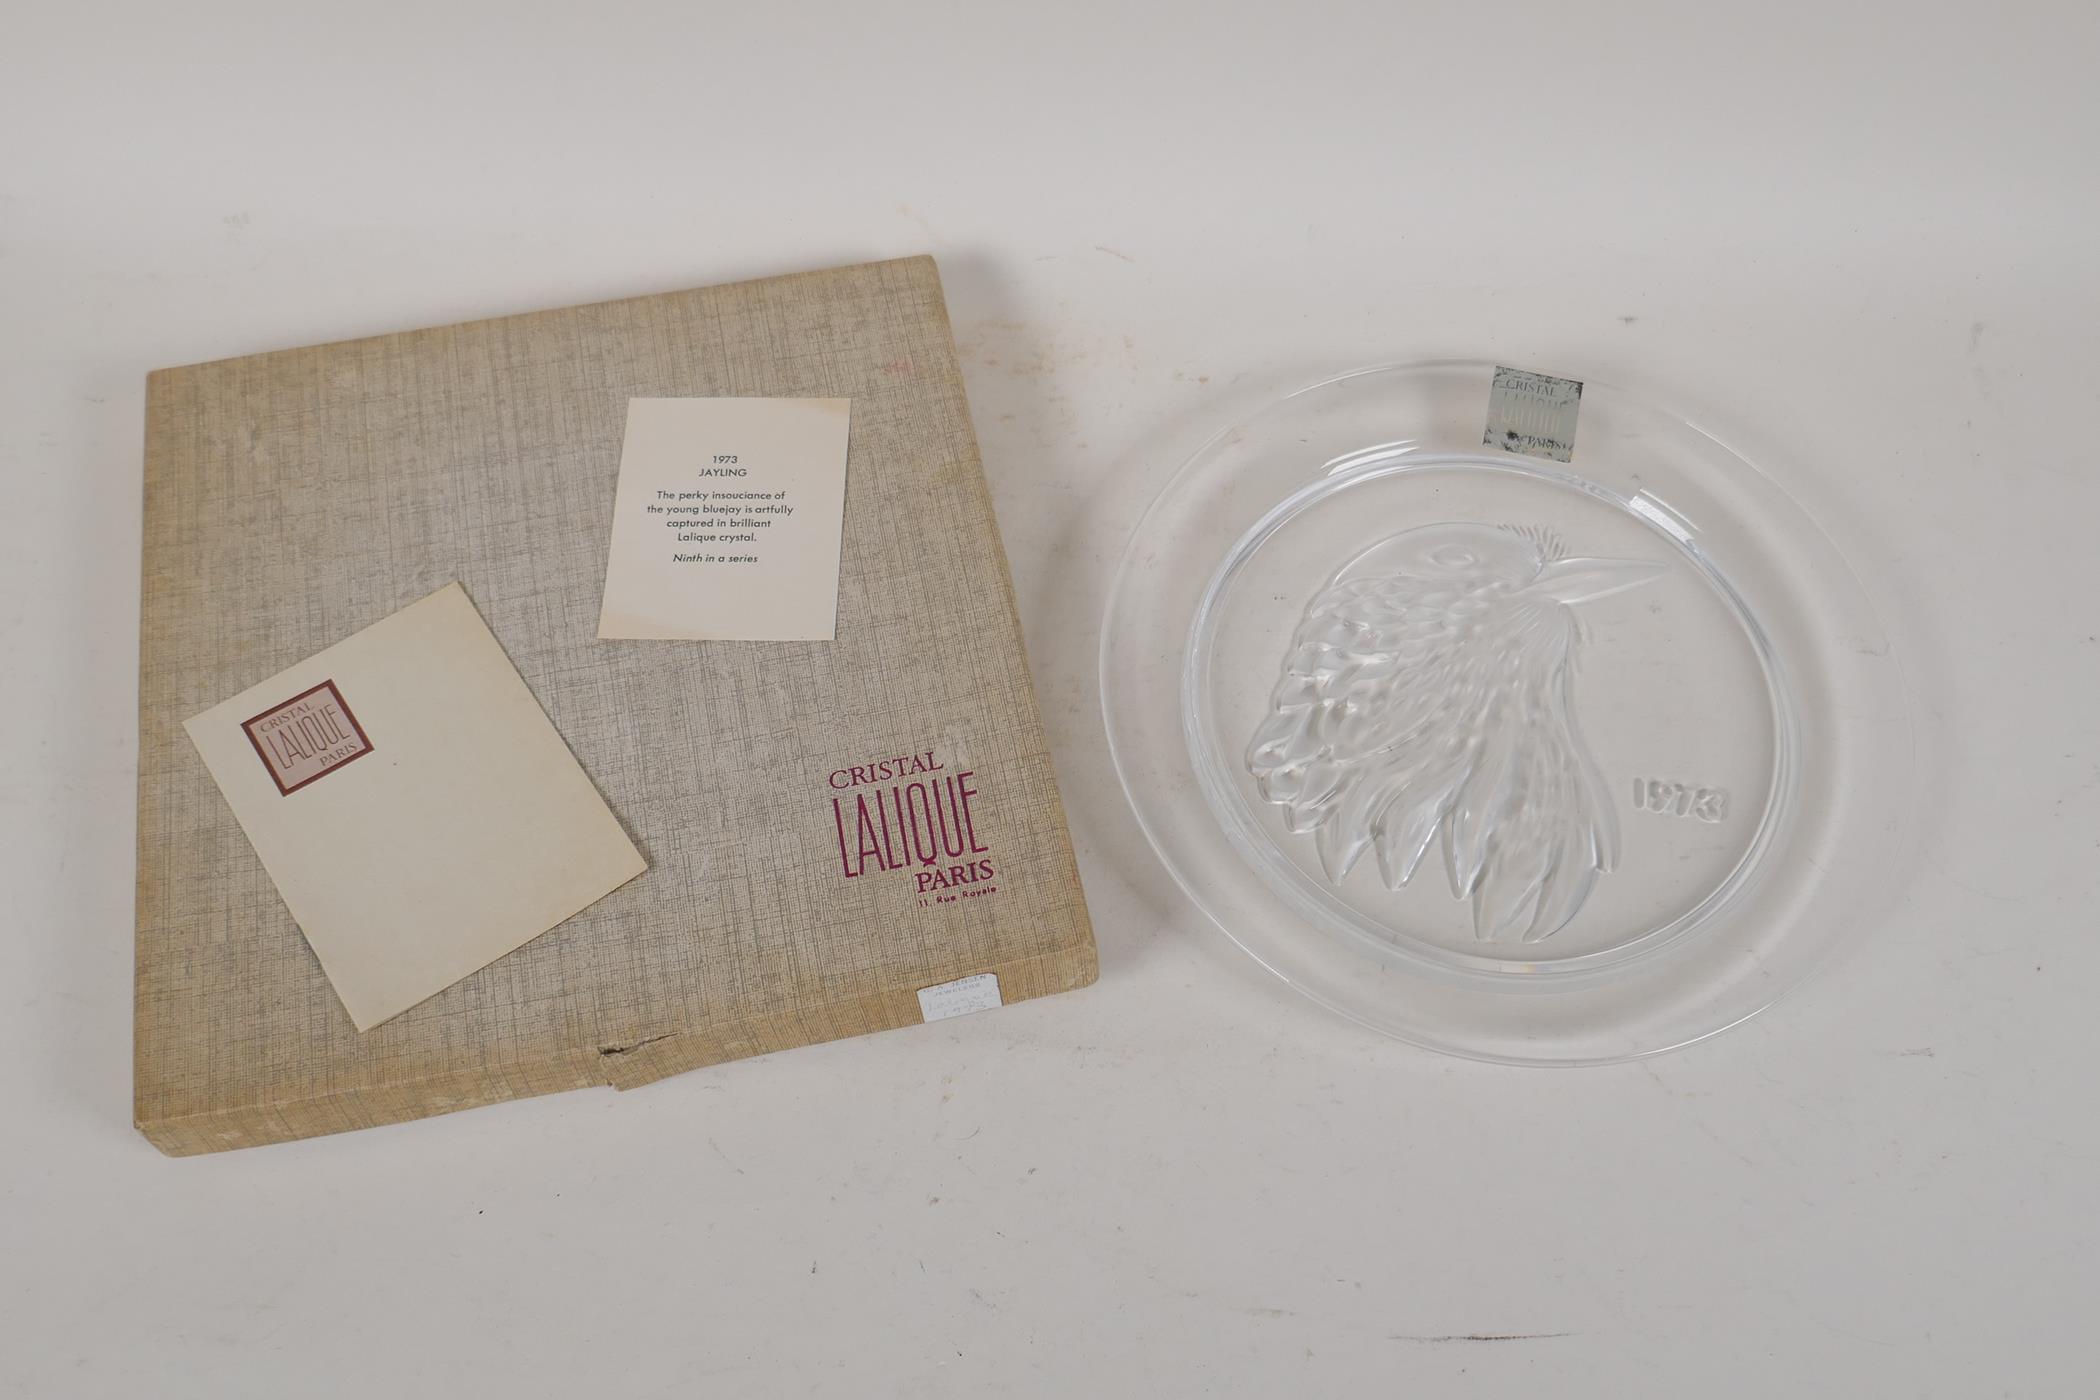 A Lalique crystal 'Jayling' dish, 1973, with original box, leaflets and stickers, 8½" diameter - Image 2 of 4